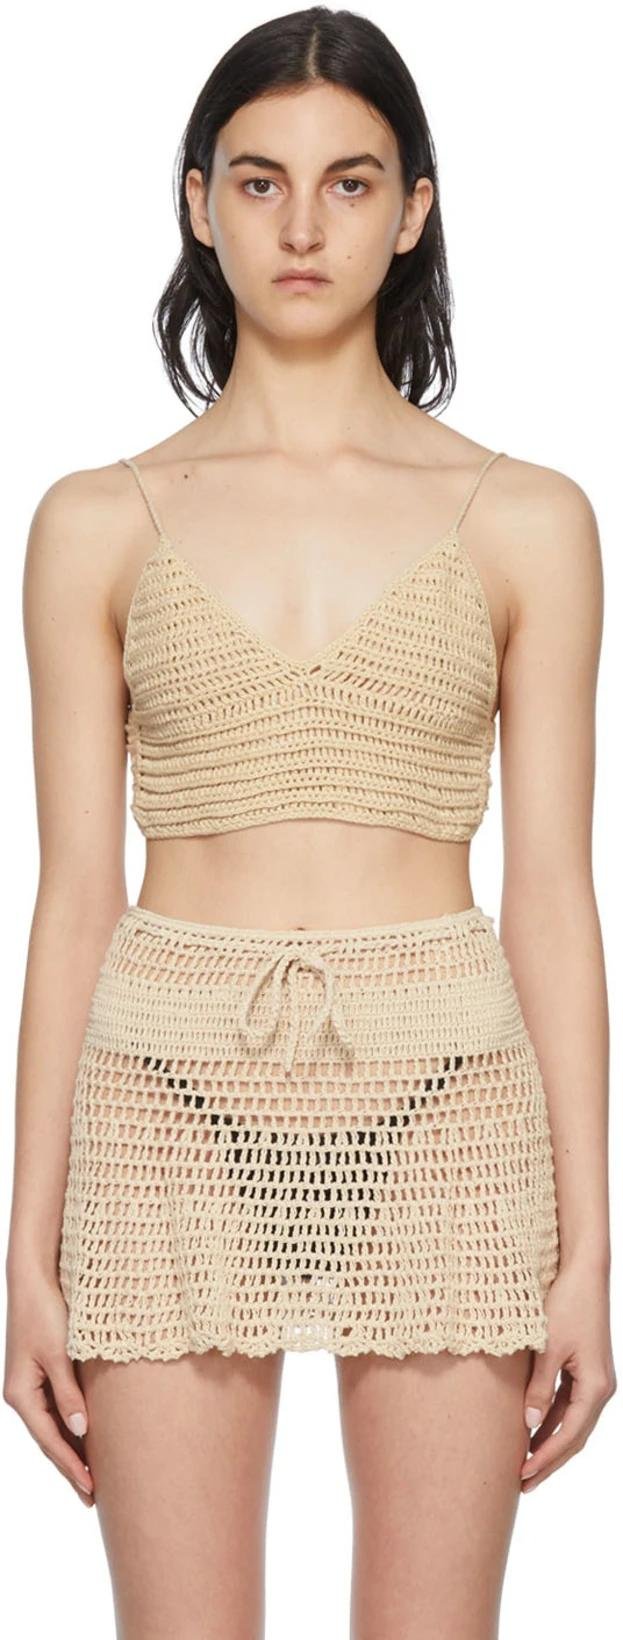 SSENSE Exclusive Beige Camisole by AKOIA